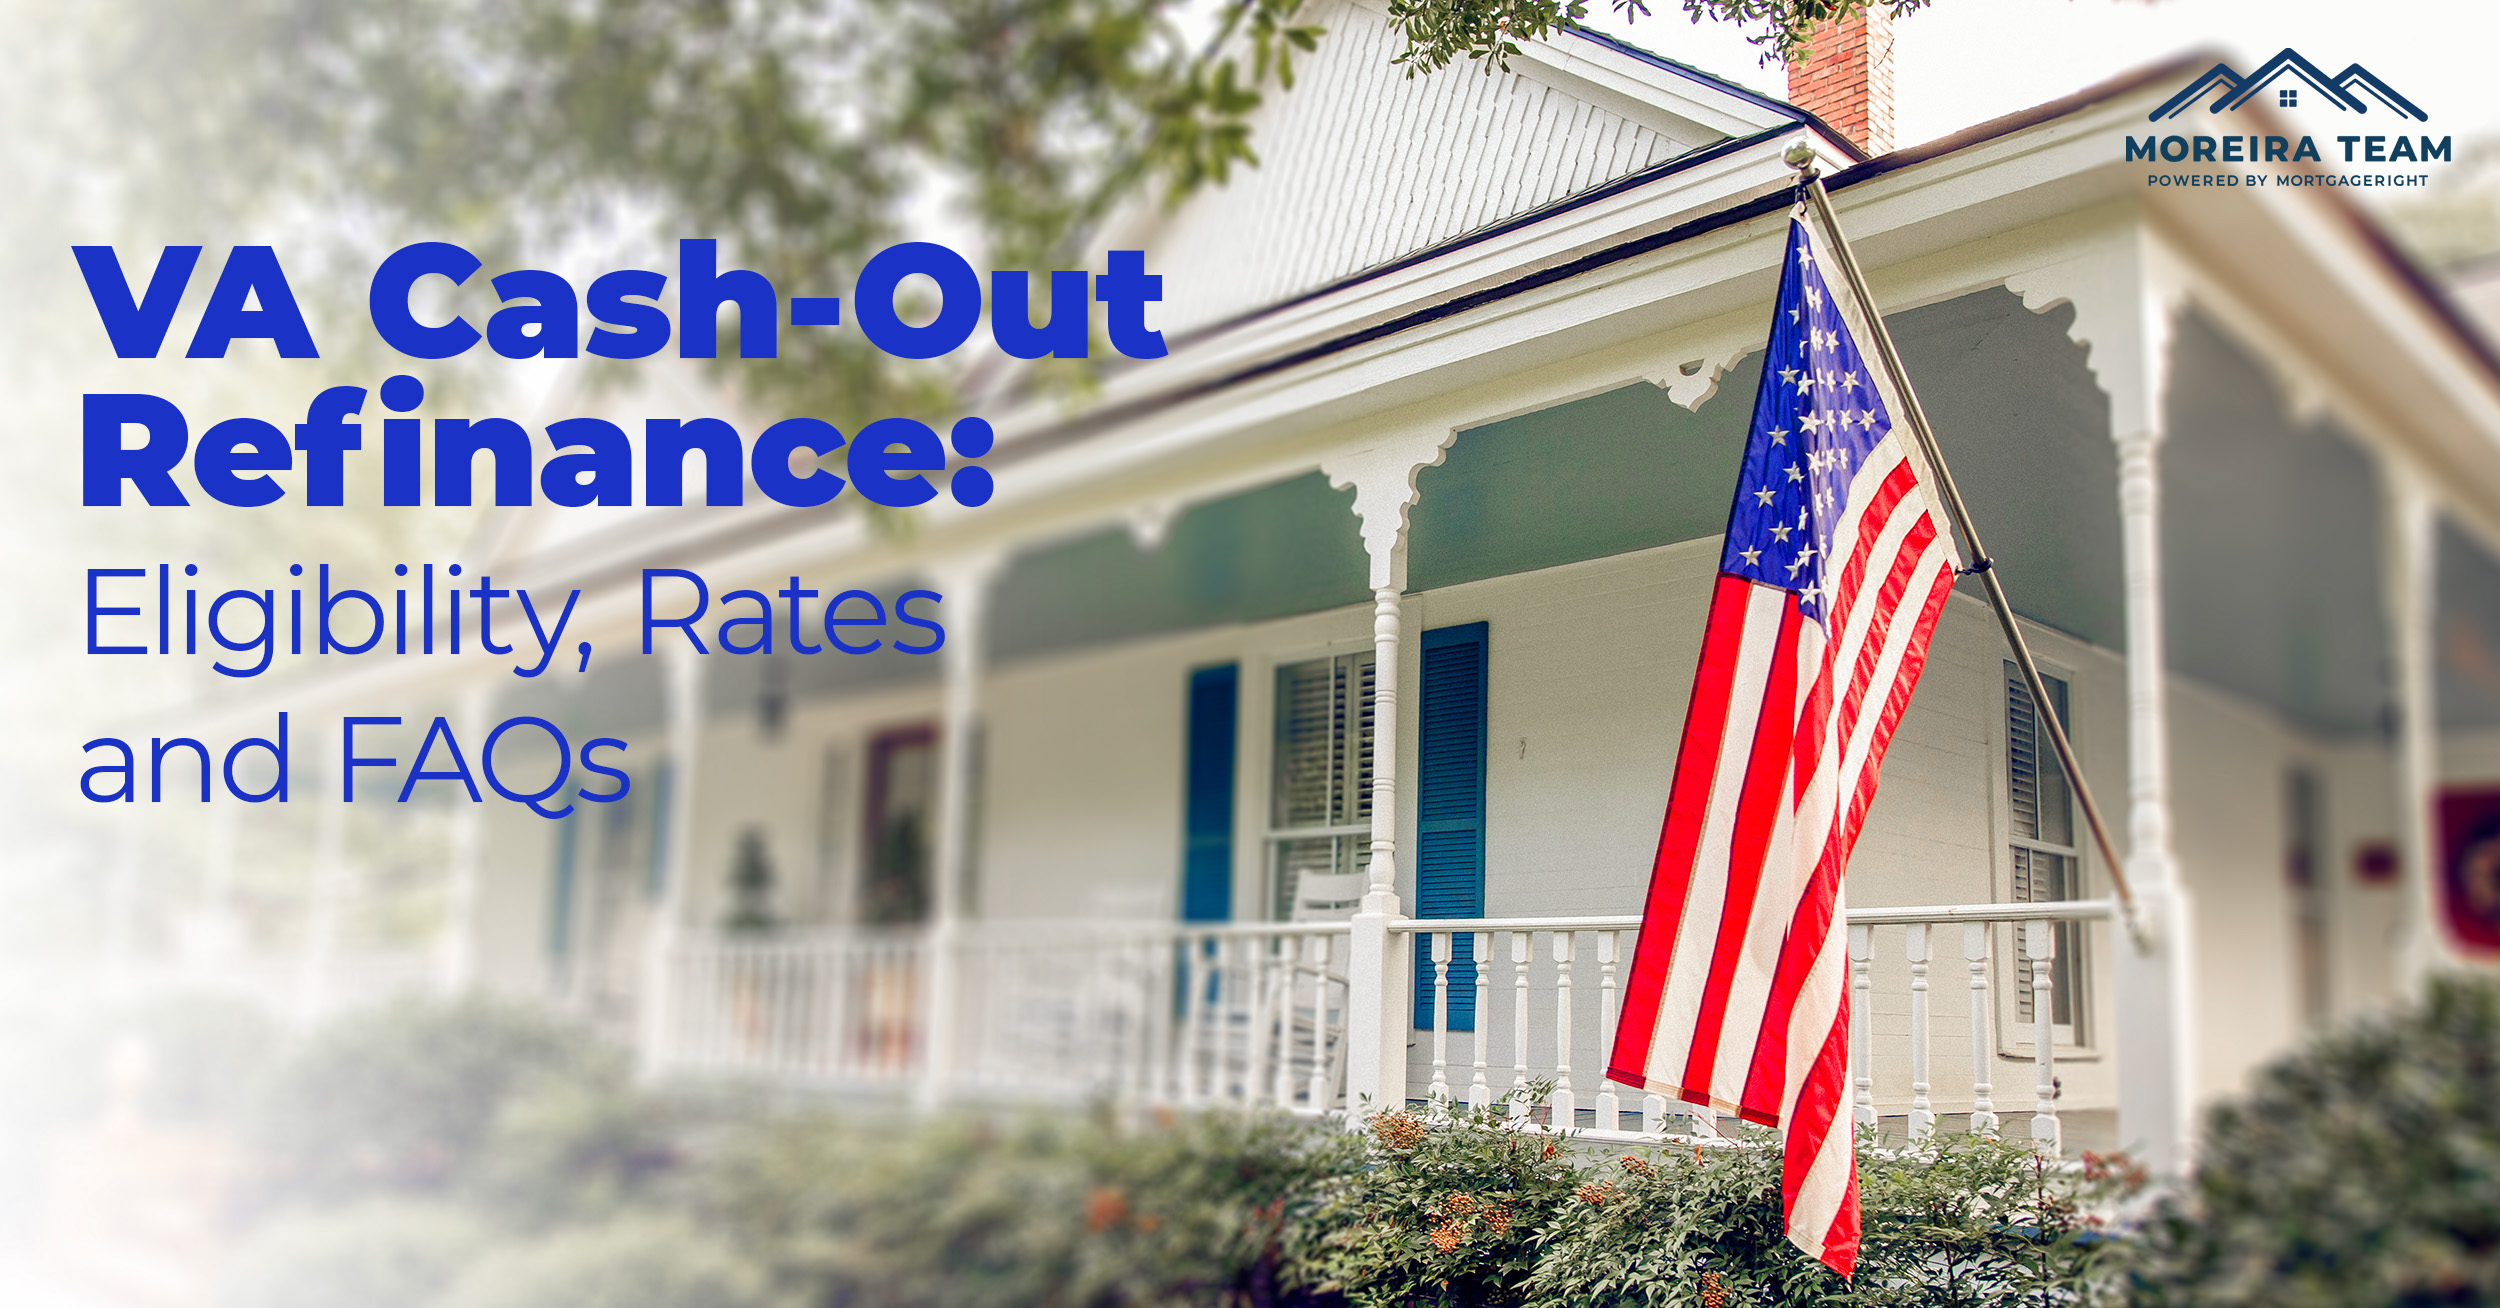 VA Cash-Out Refinance: Eligibility, Rates and FAQs